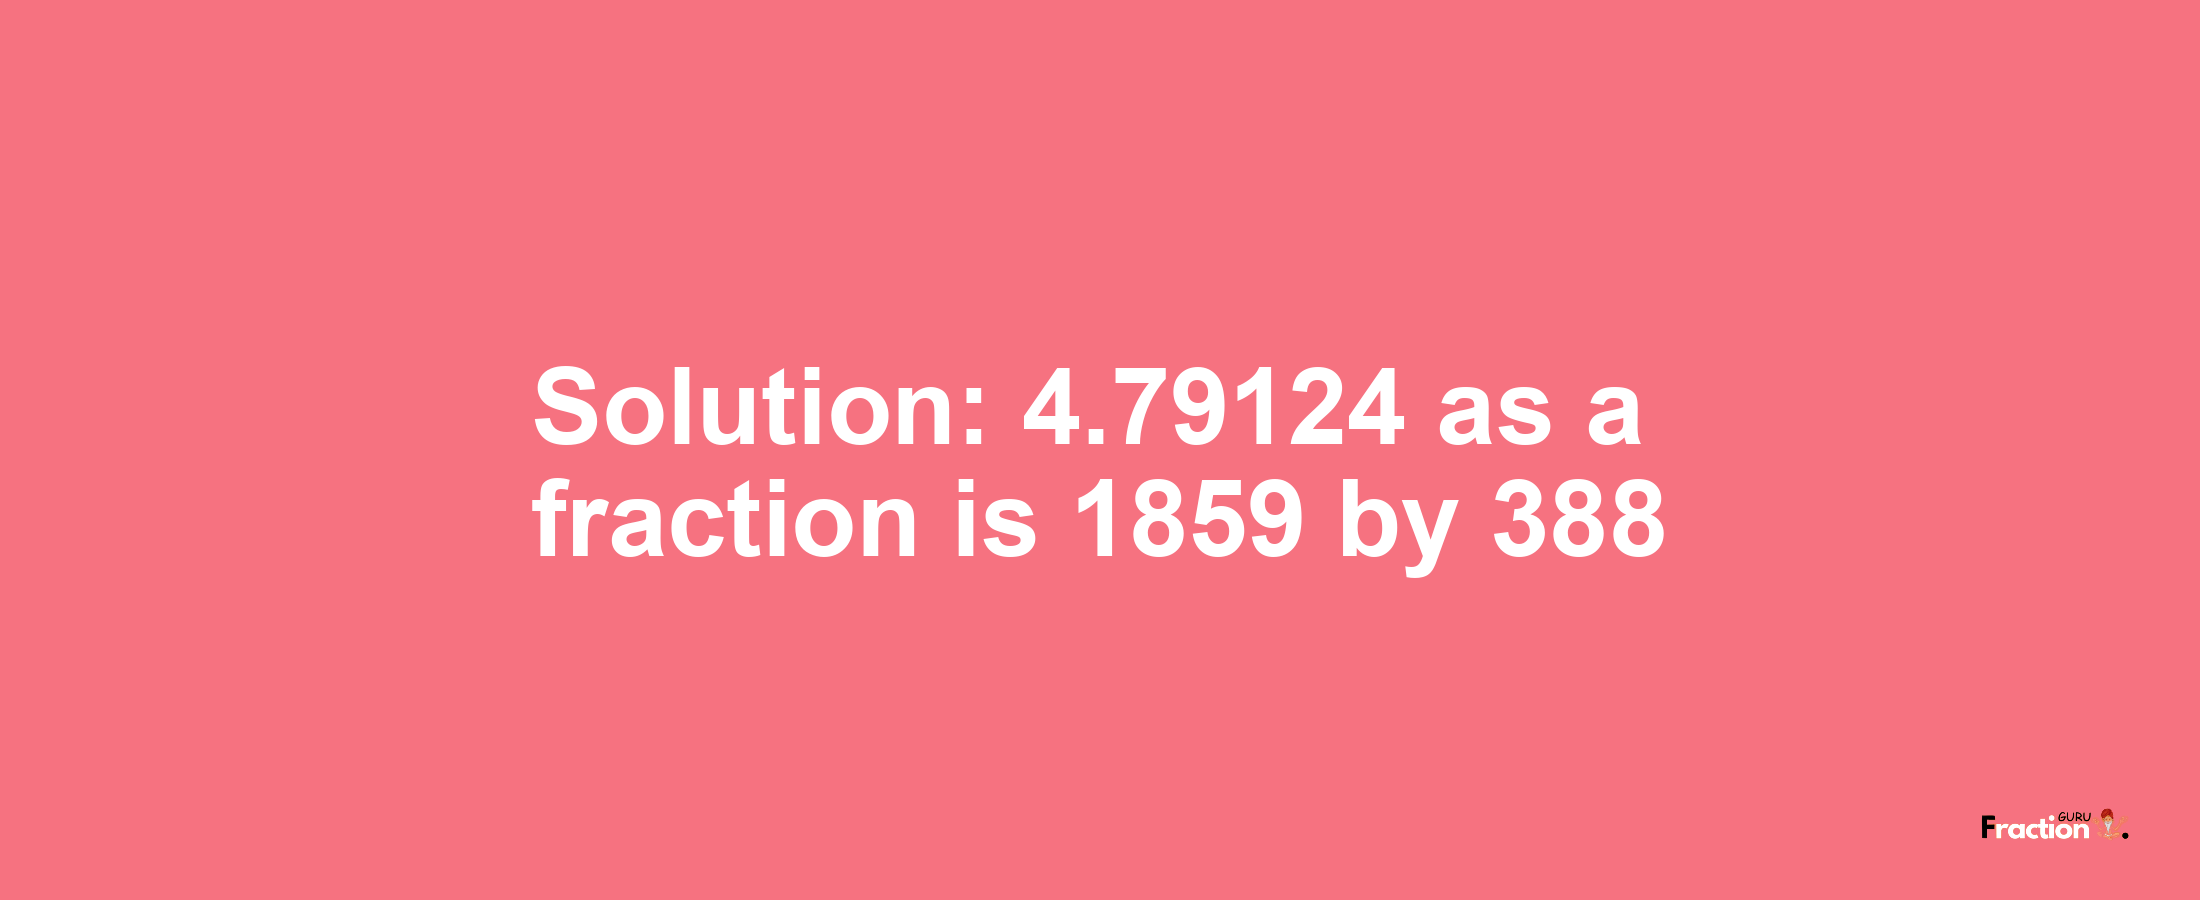 Solution:4.79124 as a fraction is 1859/388